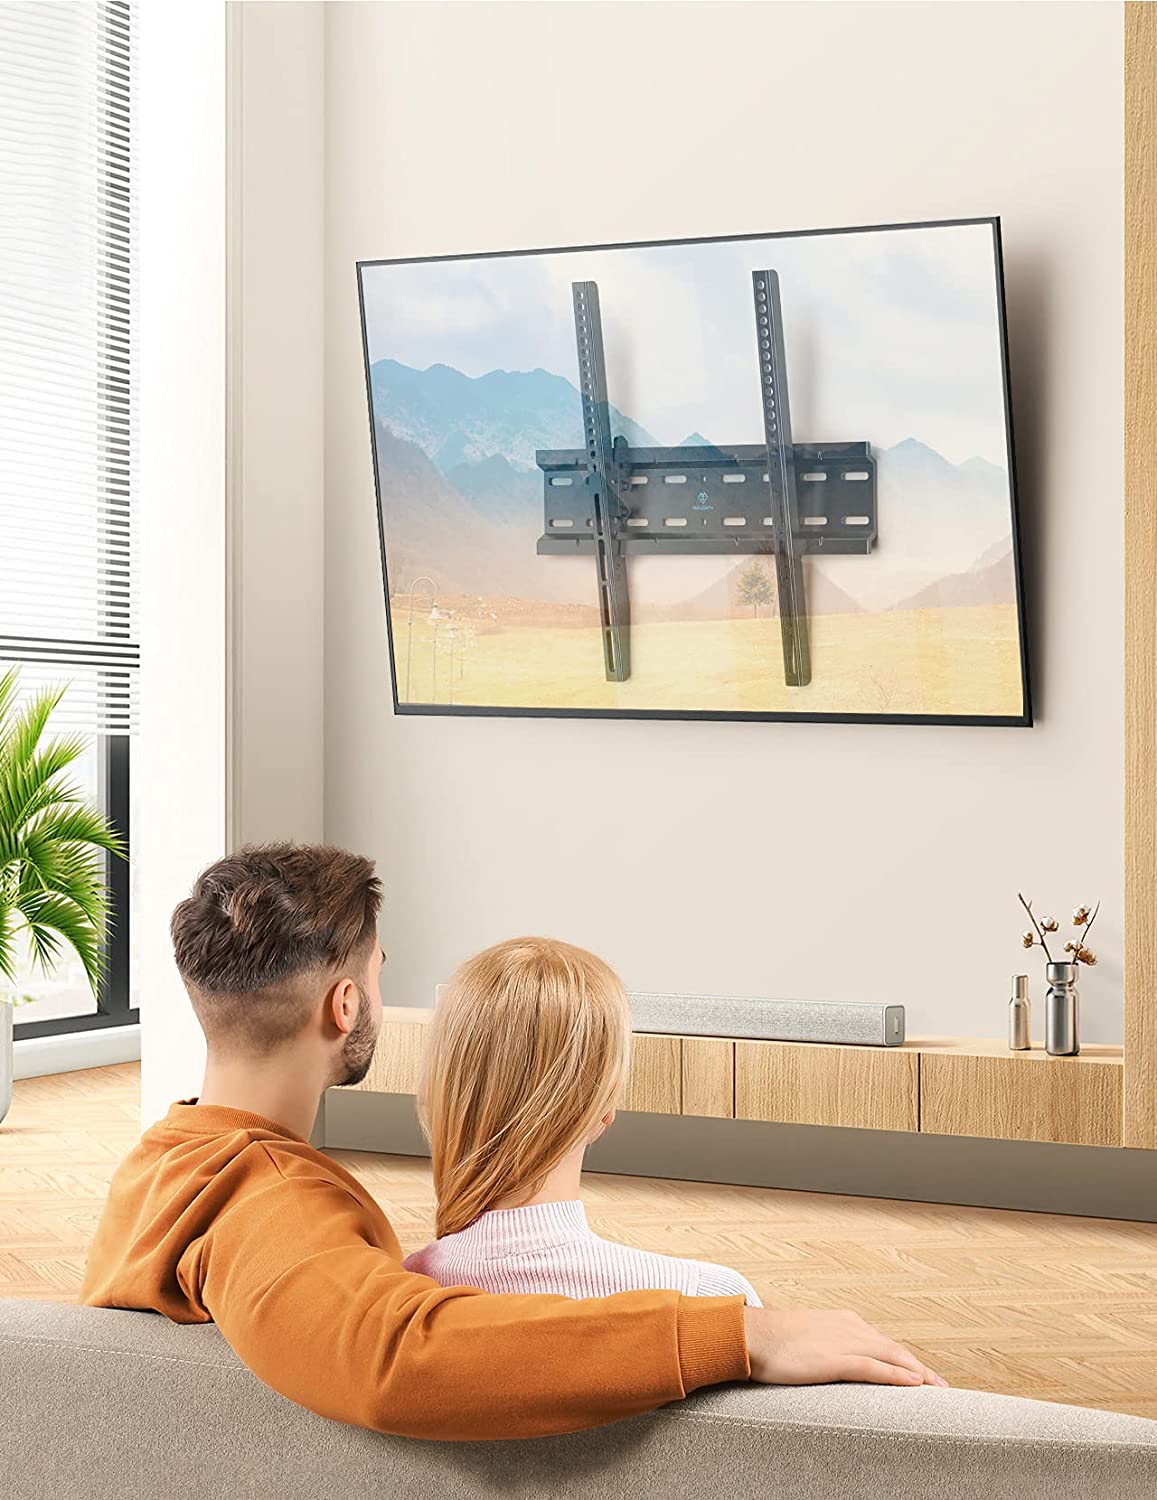 Space-savers for small apartments: Wall mounted TVs can save lots of space in small living rooms and studio apartments